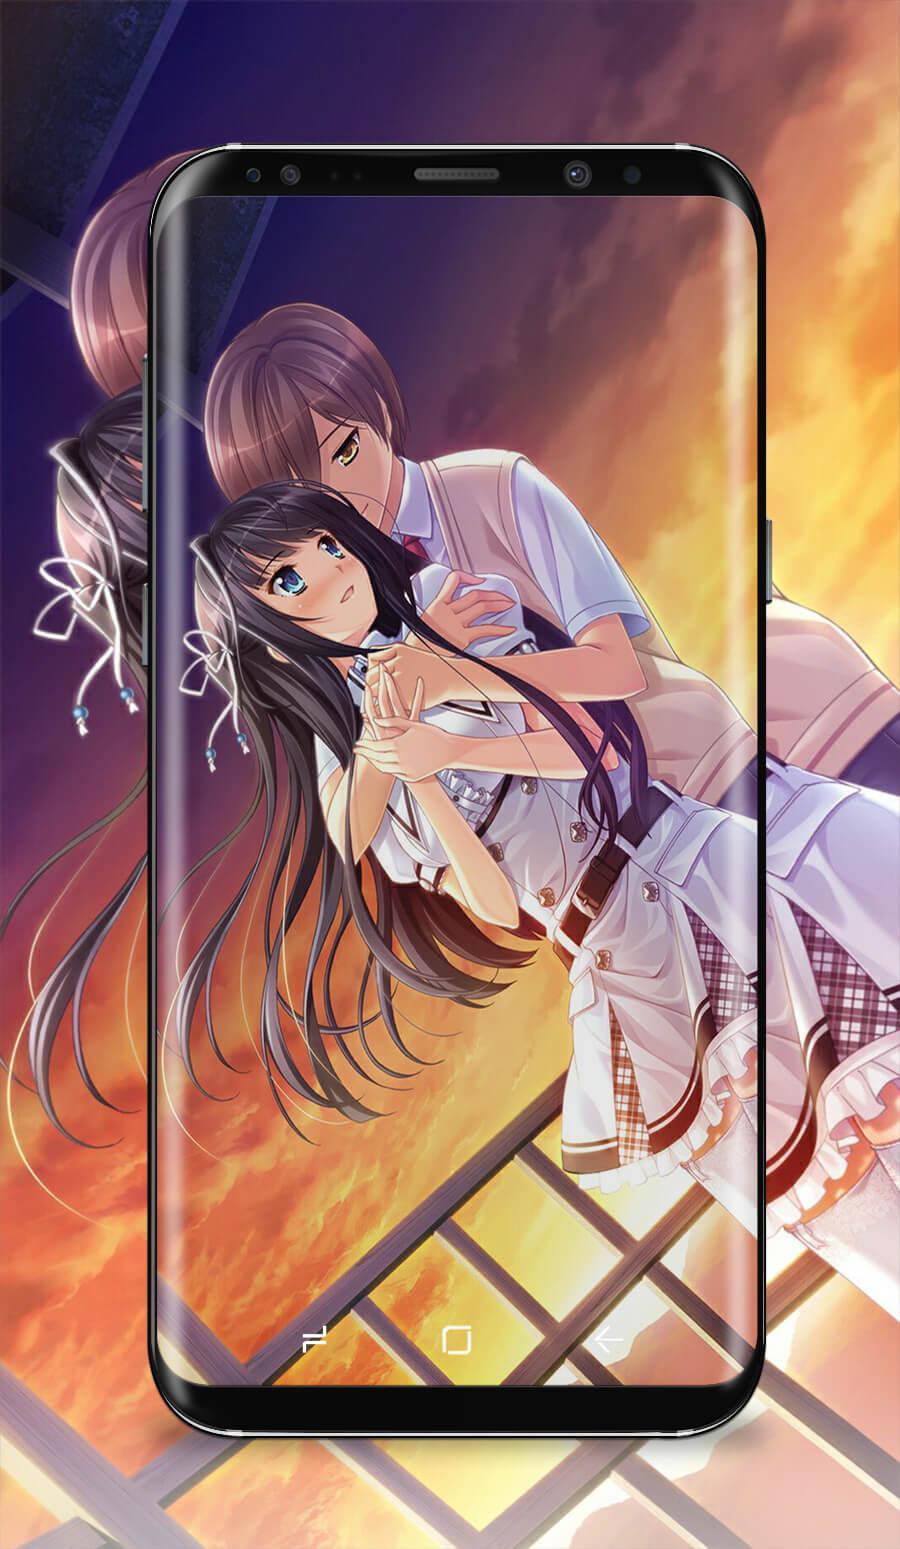 Anime Couple Kissing Wallpaper For Android Apk Download